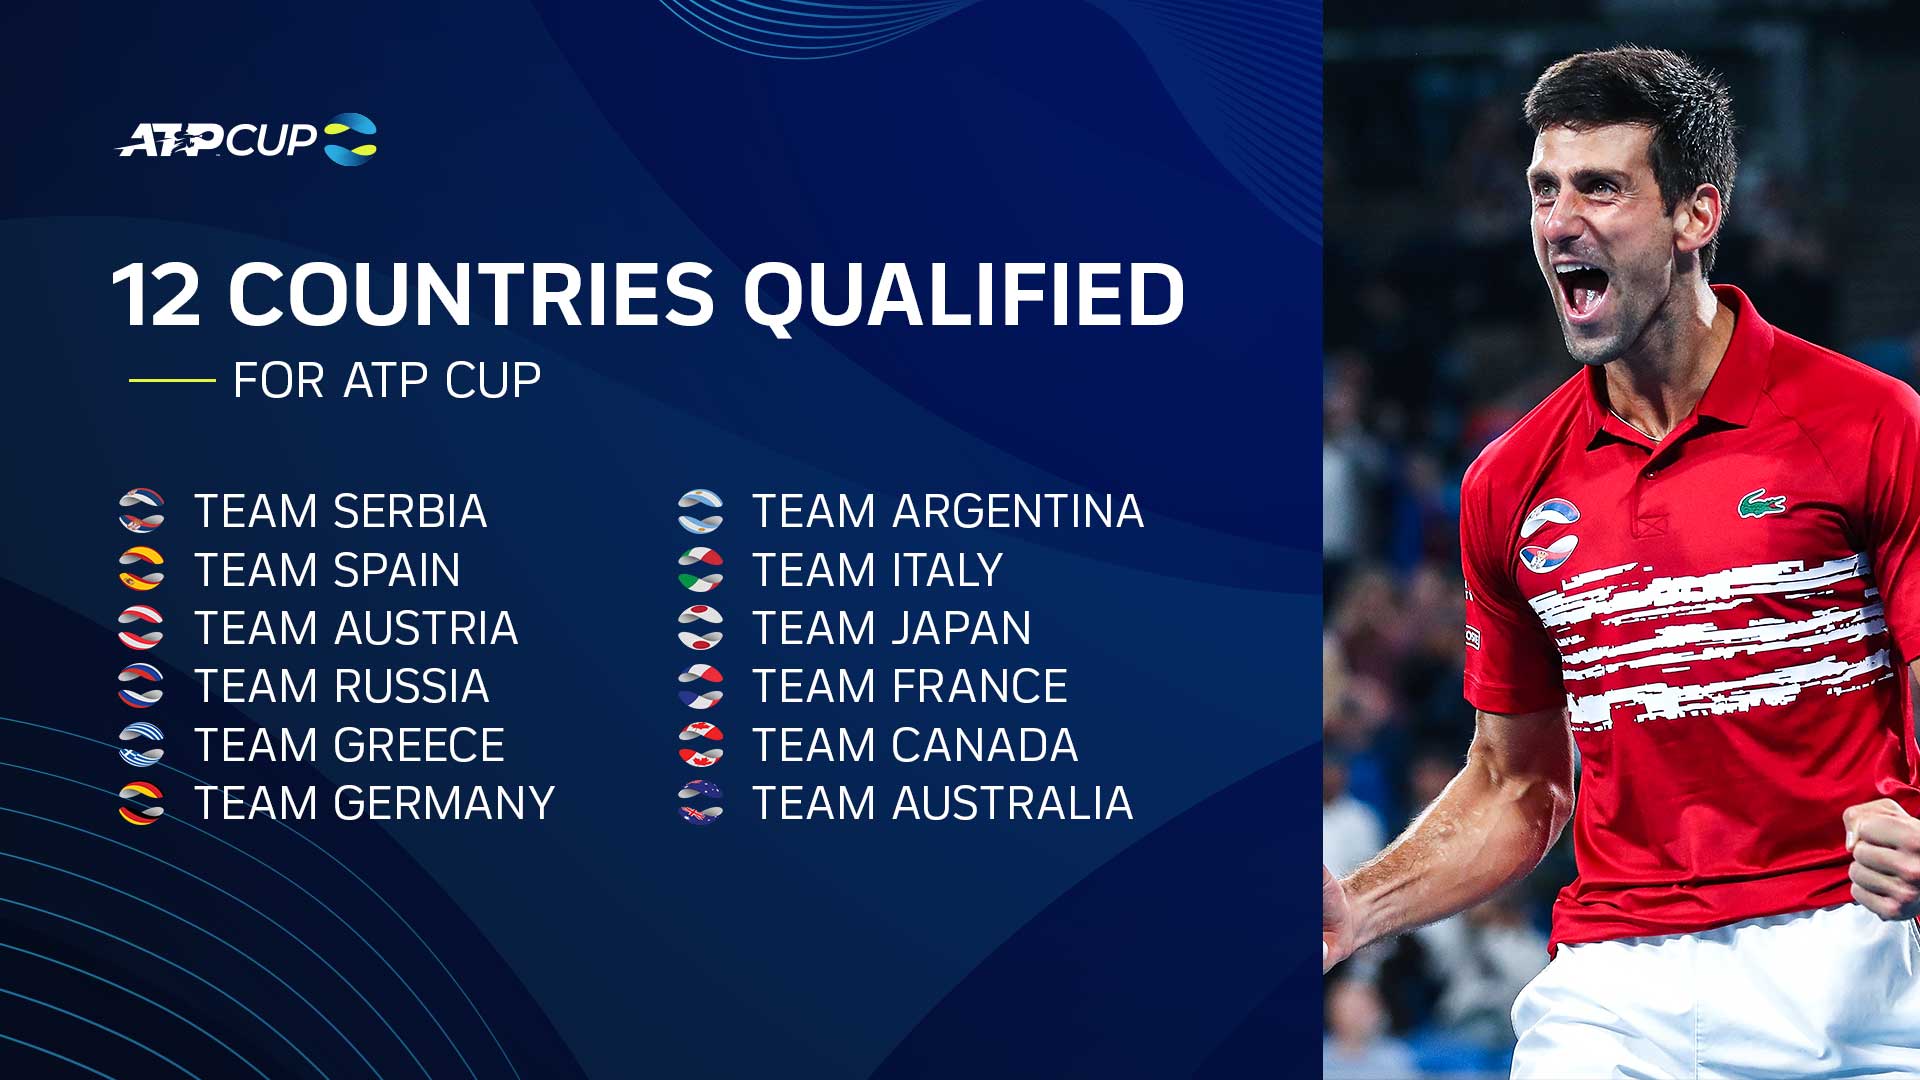 ATP Cup: 12 Countries Qualified